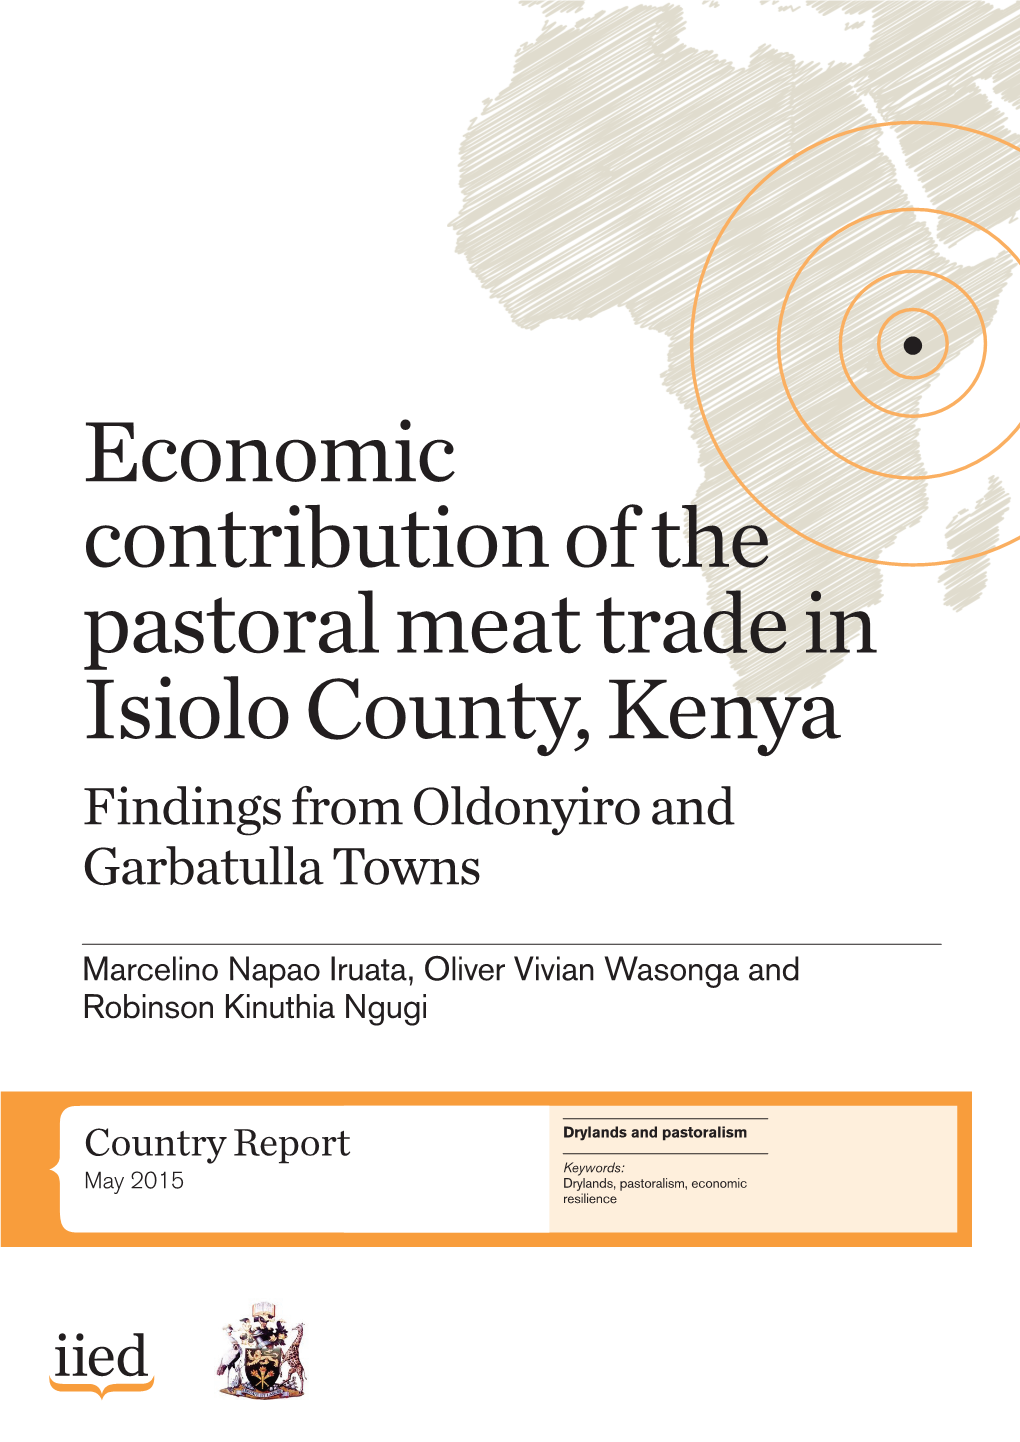 Economic Contribution of the Pastoral Meat Trade in Isiolo County, Kenya Findings from Oldonyiro and Garbatulla Towns